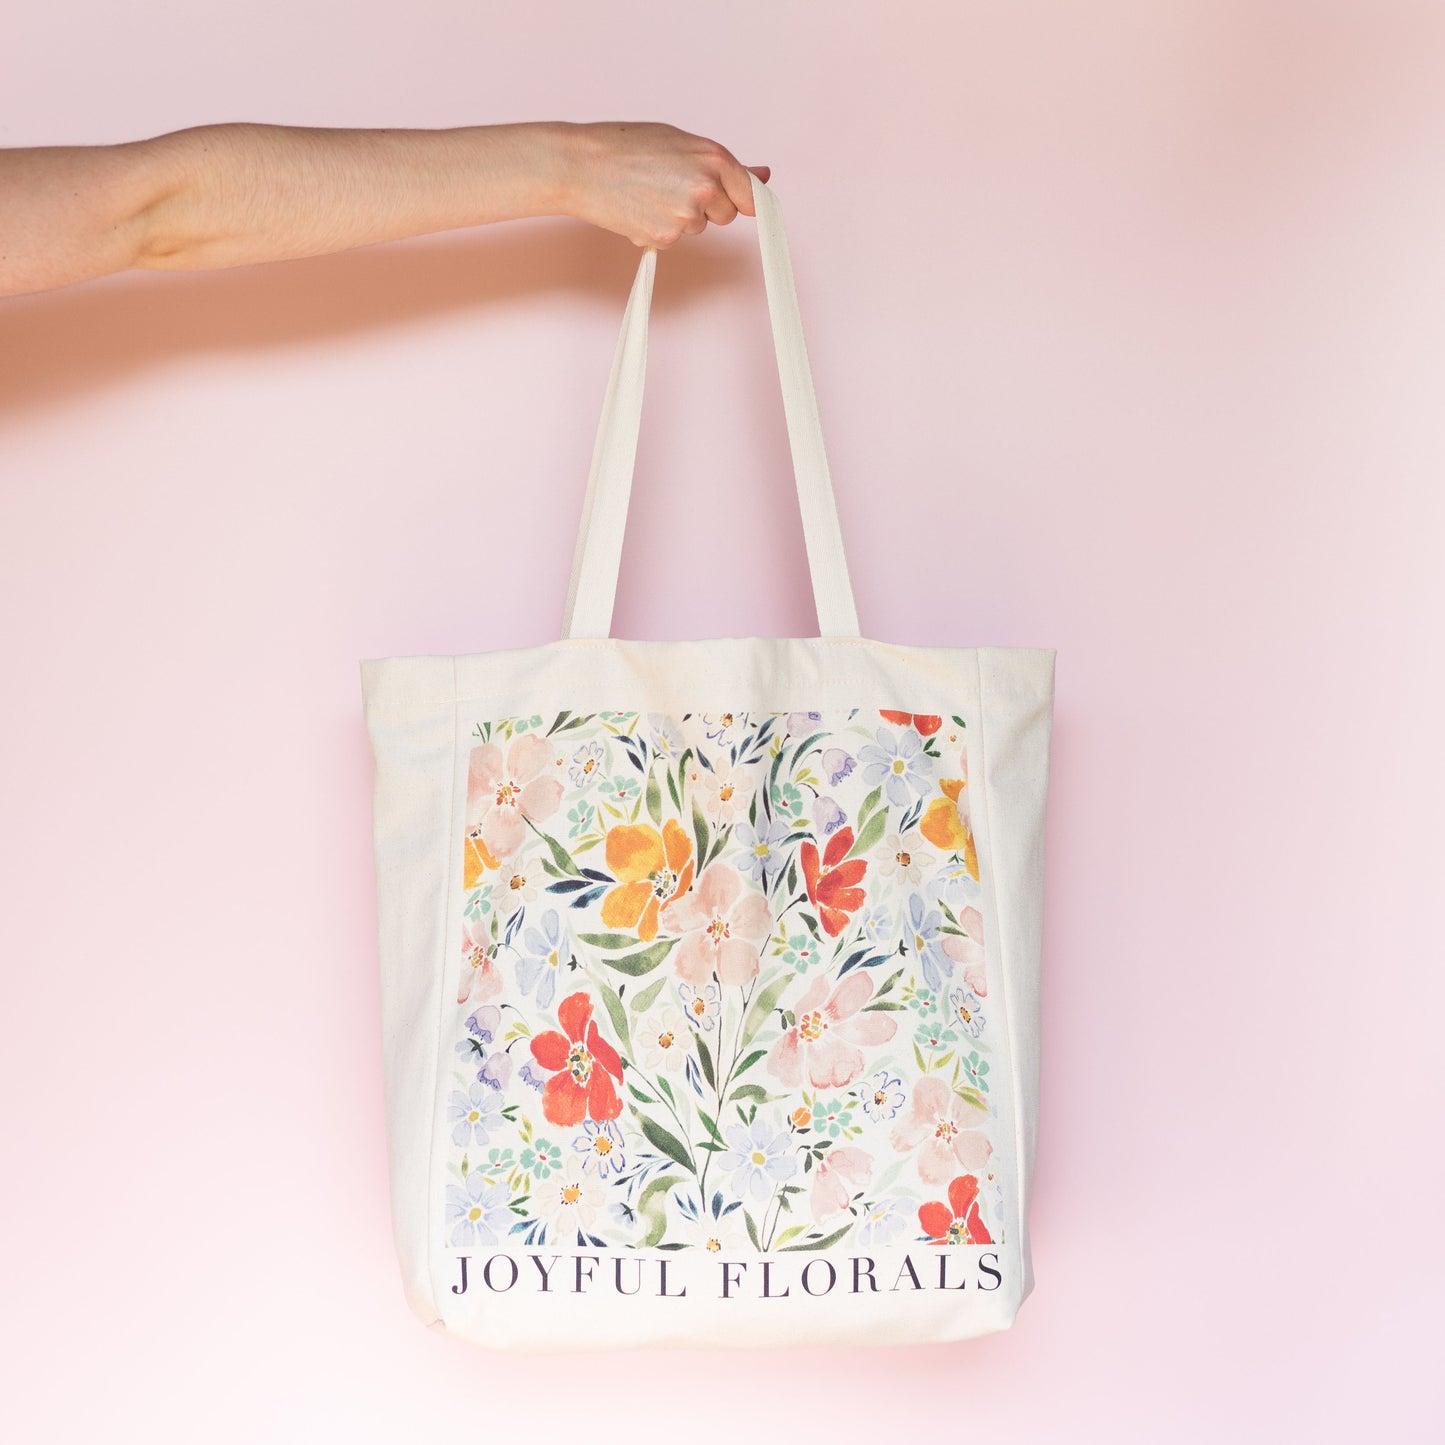 joyful florals tote bag. Gusset Tote Bag with an a5 inner pocket. Colourful wildflower design on the front with the text joyful florals. Originally hand painted by ellie mae.